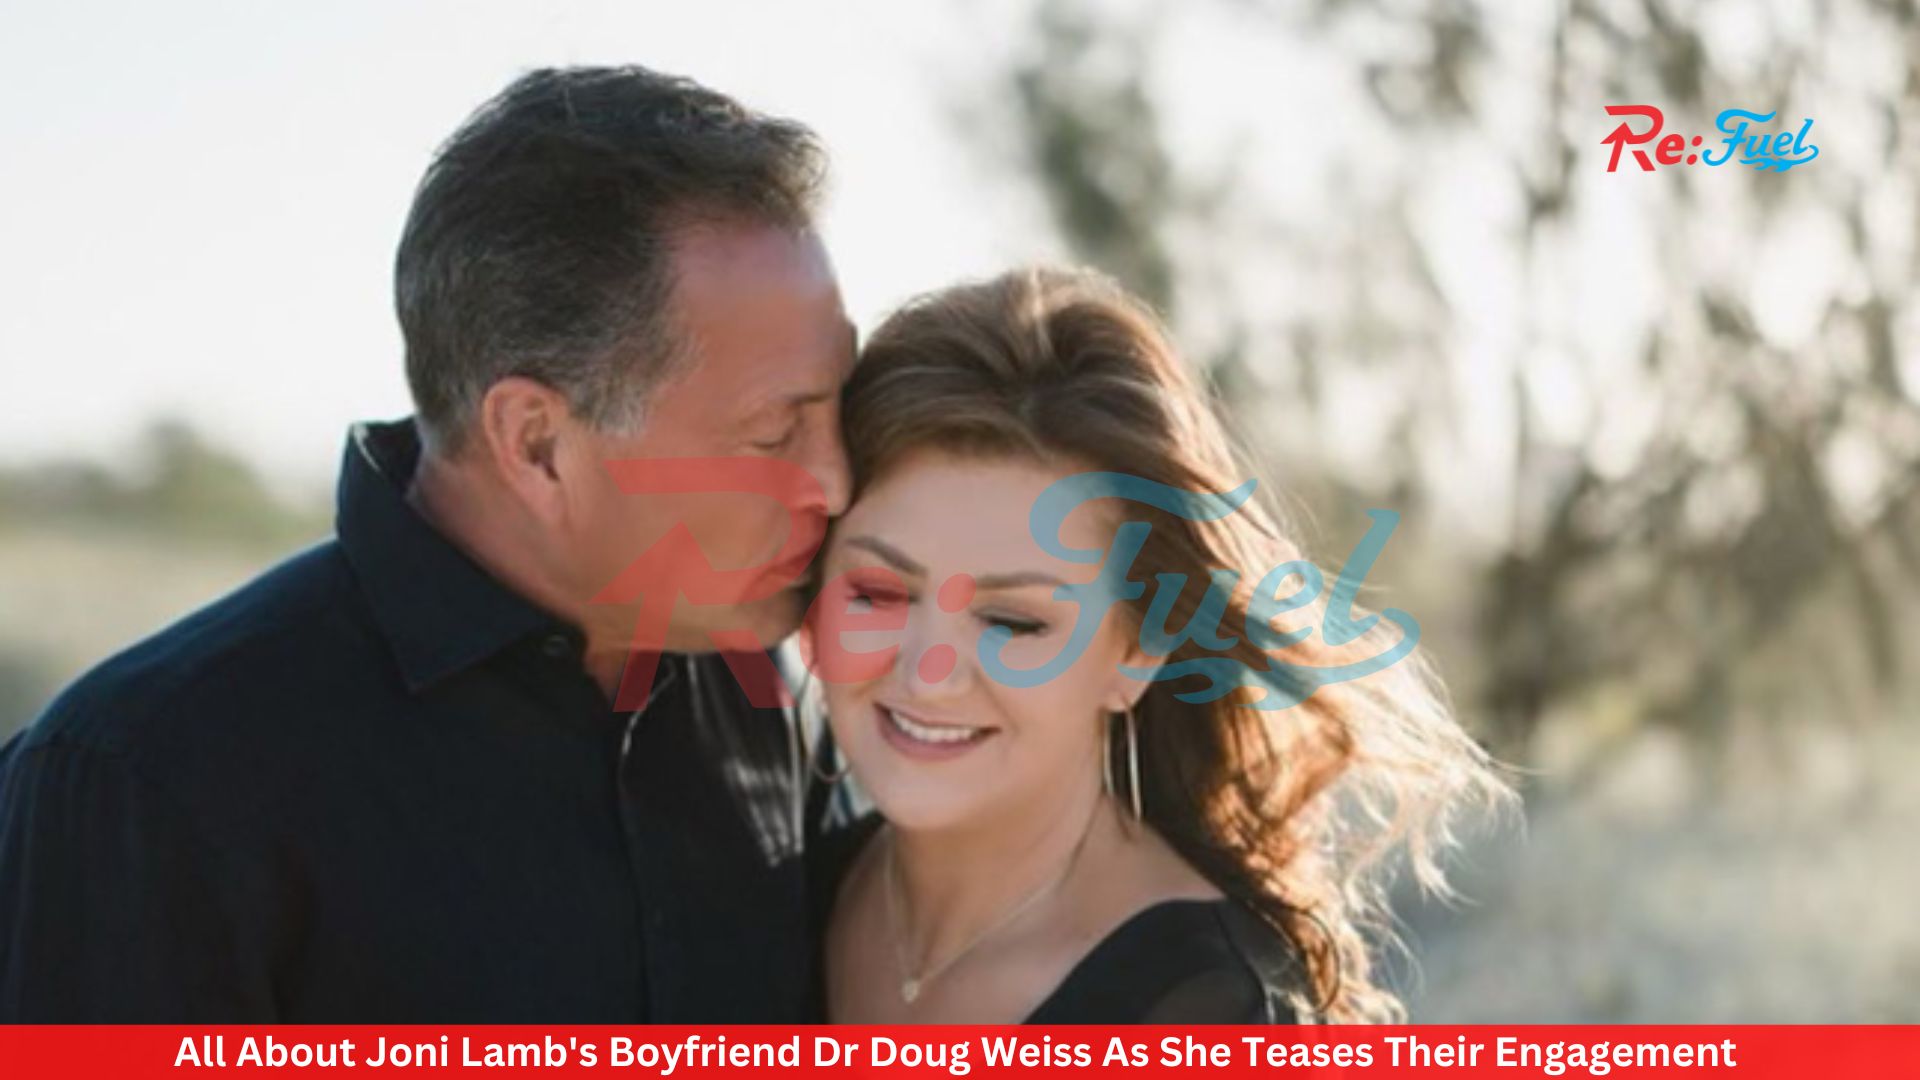 All About Joni Lamb's Boyfriend Dr Doug Weiss As She Teases Their Engagement